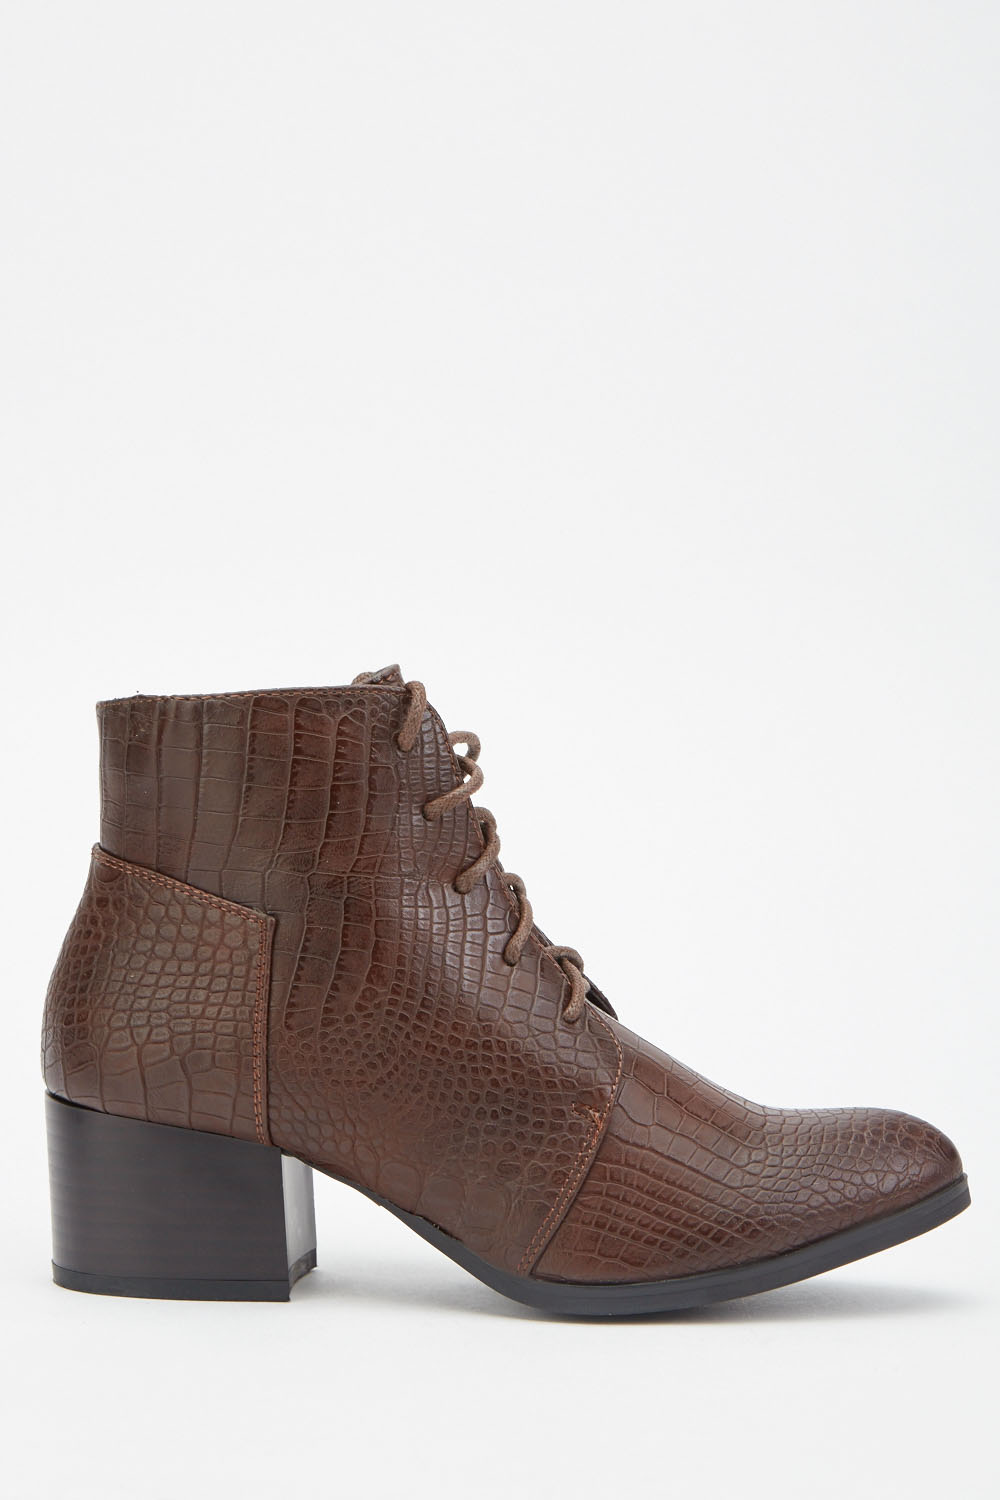 Lace Up Mock Croc Ankle Boots - Just £5